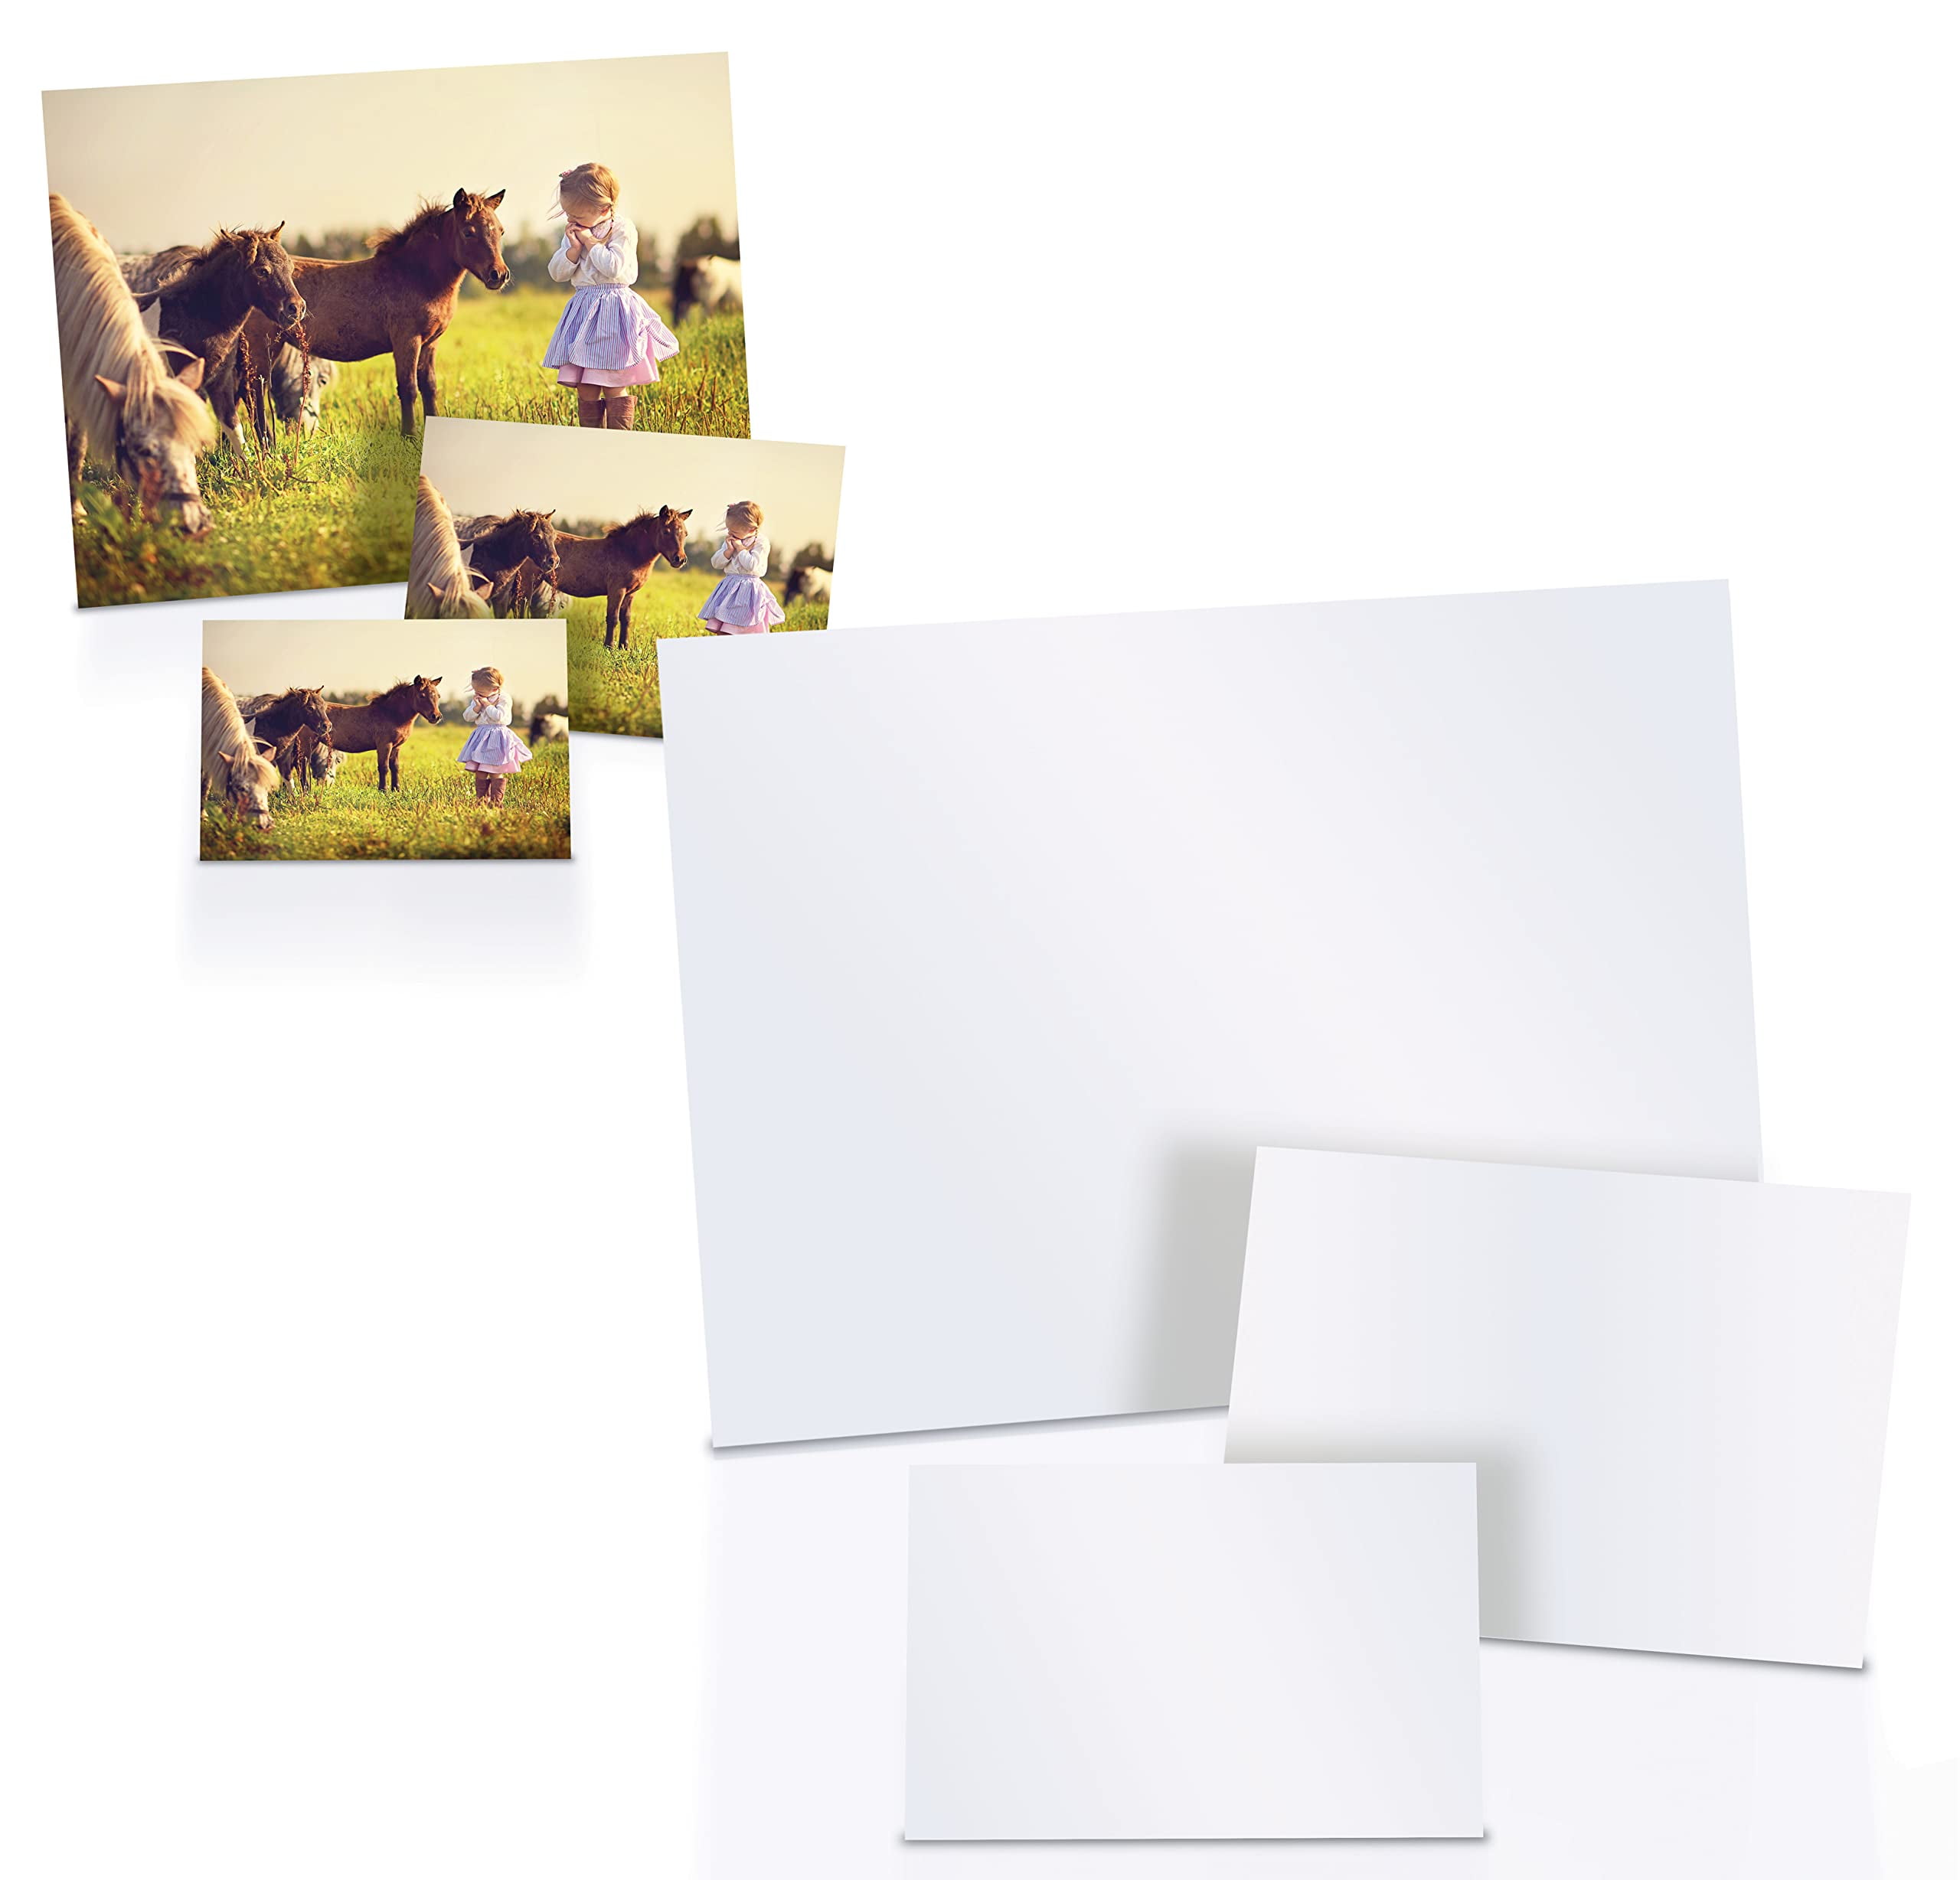   Basics Photo Paper, Glossy, 8.5 x 11 Inch, Pack of 100  Sheets, 200g/m², White : Office Products